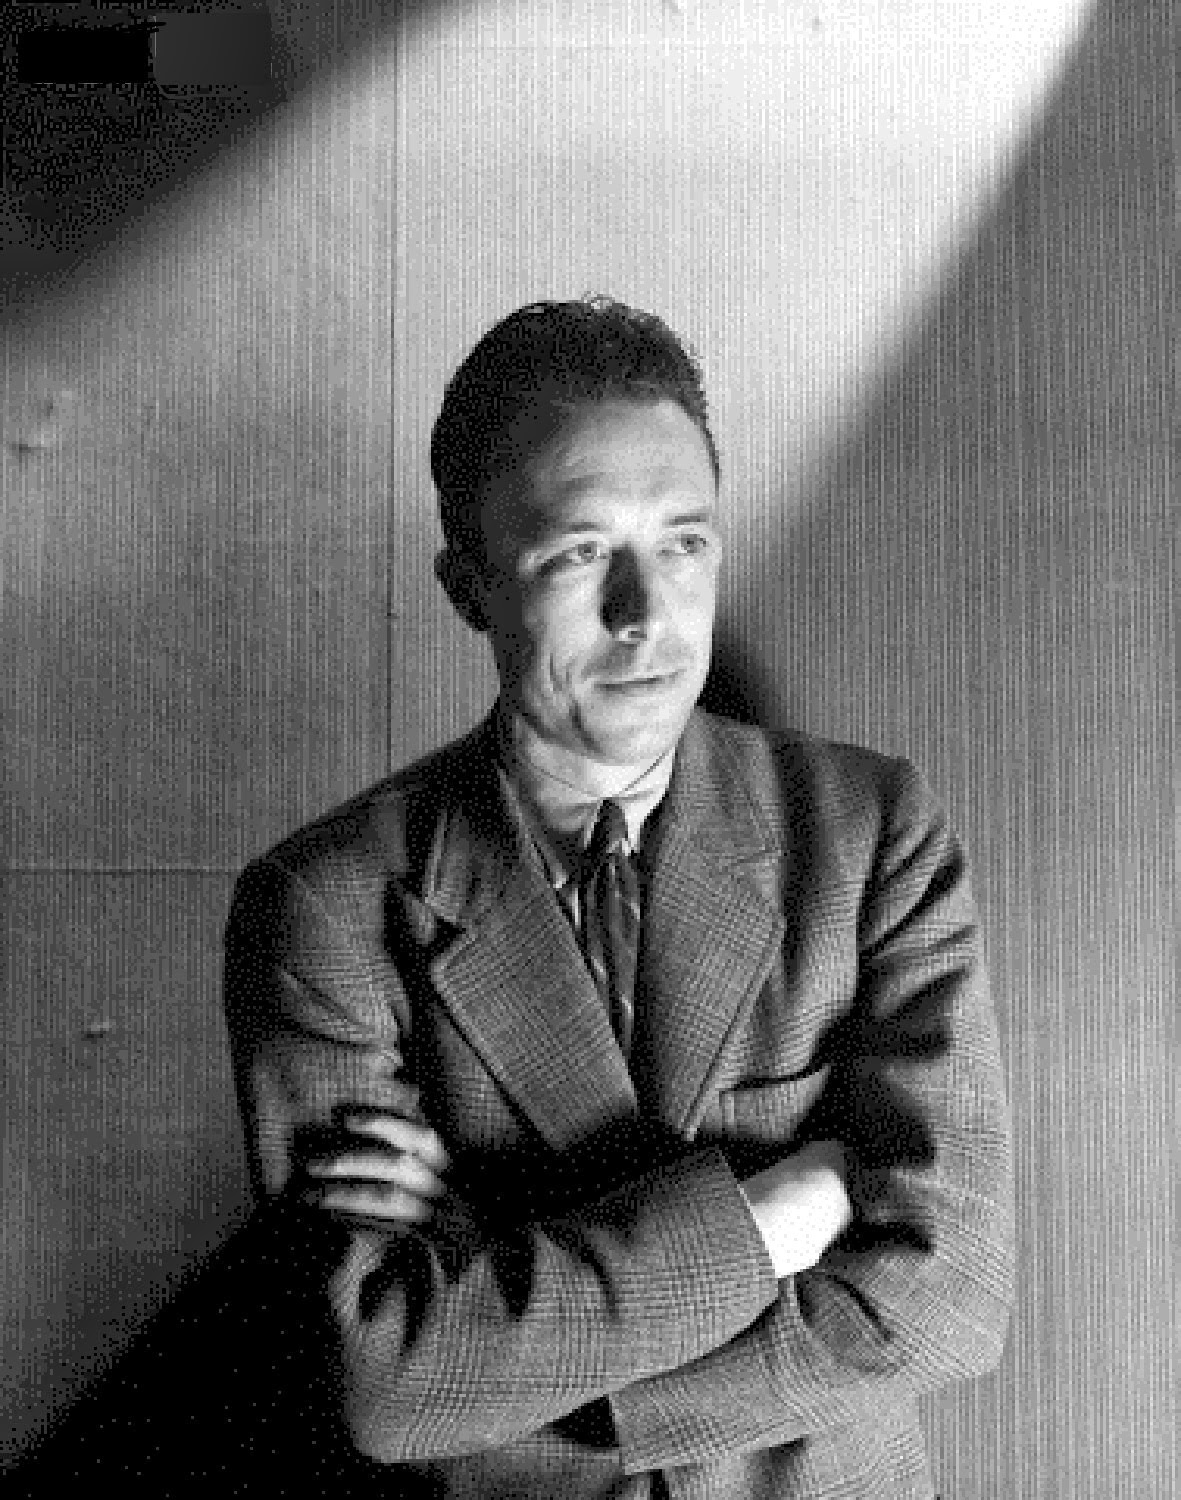 Circa June 1946, Paris, France --- French author and philosopher Albert Camus standing with his arms folded. Circa June 1946 --- Image by © Condé Nast Archive/Corbis